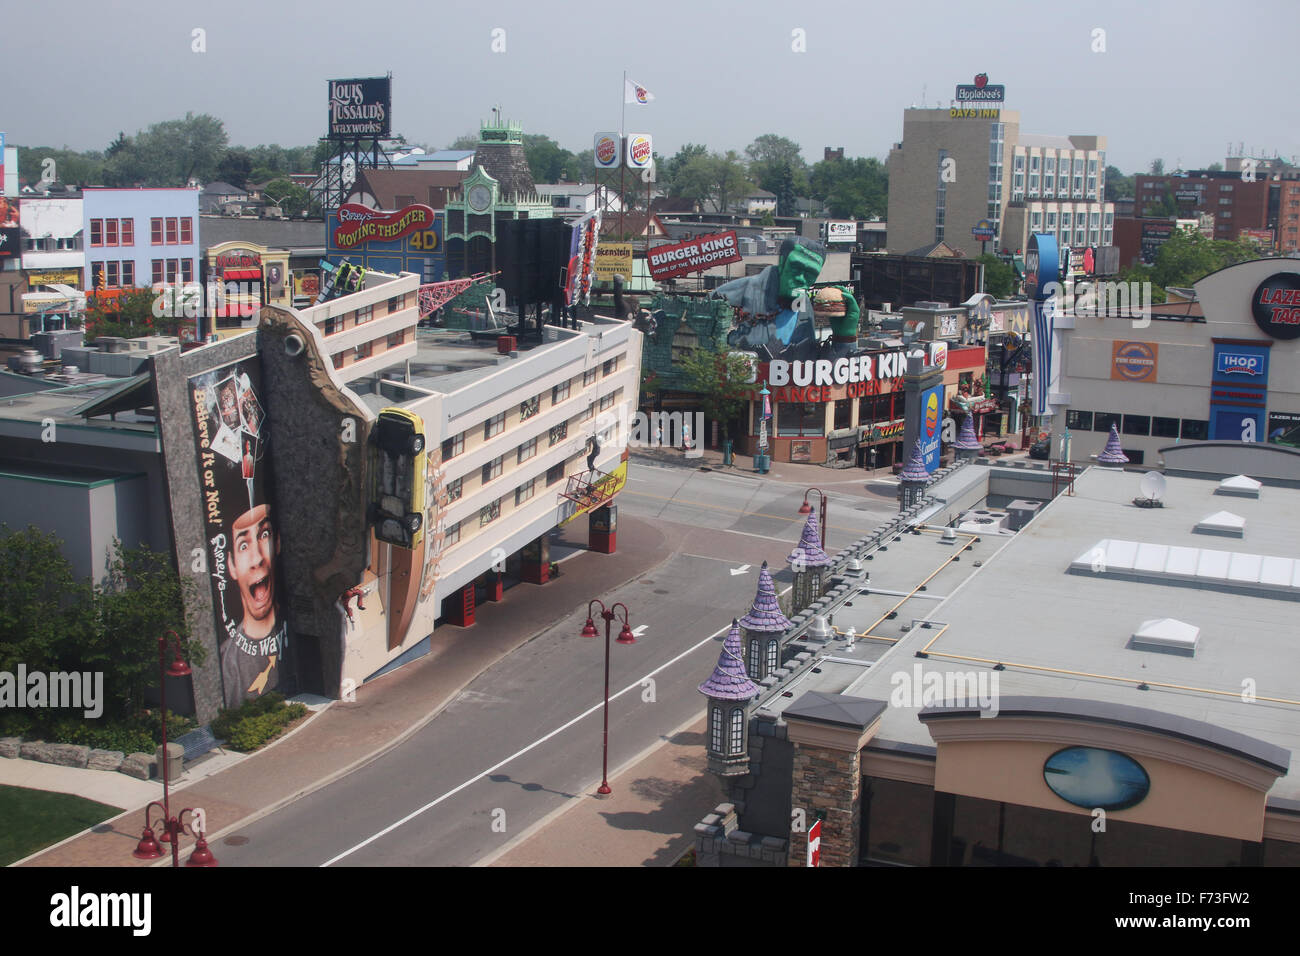 Ripley's Believe It Or Not building. Burger King Restaurant with Frankenstein holding a Whopper hamburger. Clifton Hill tourist Stock Photo